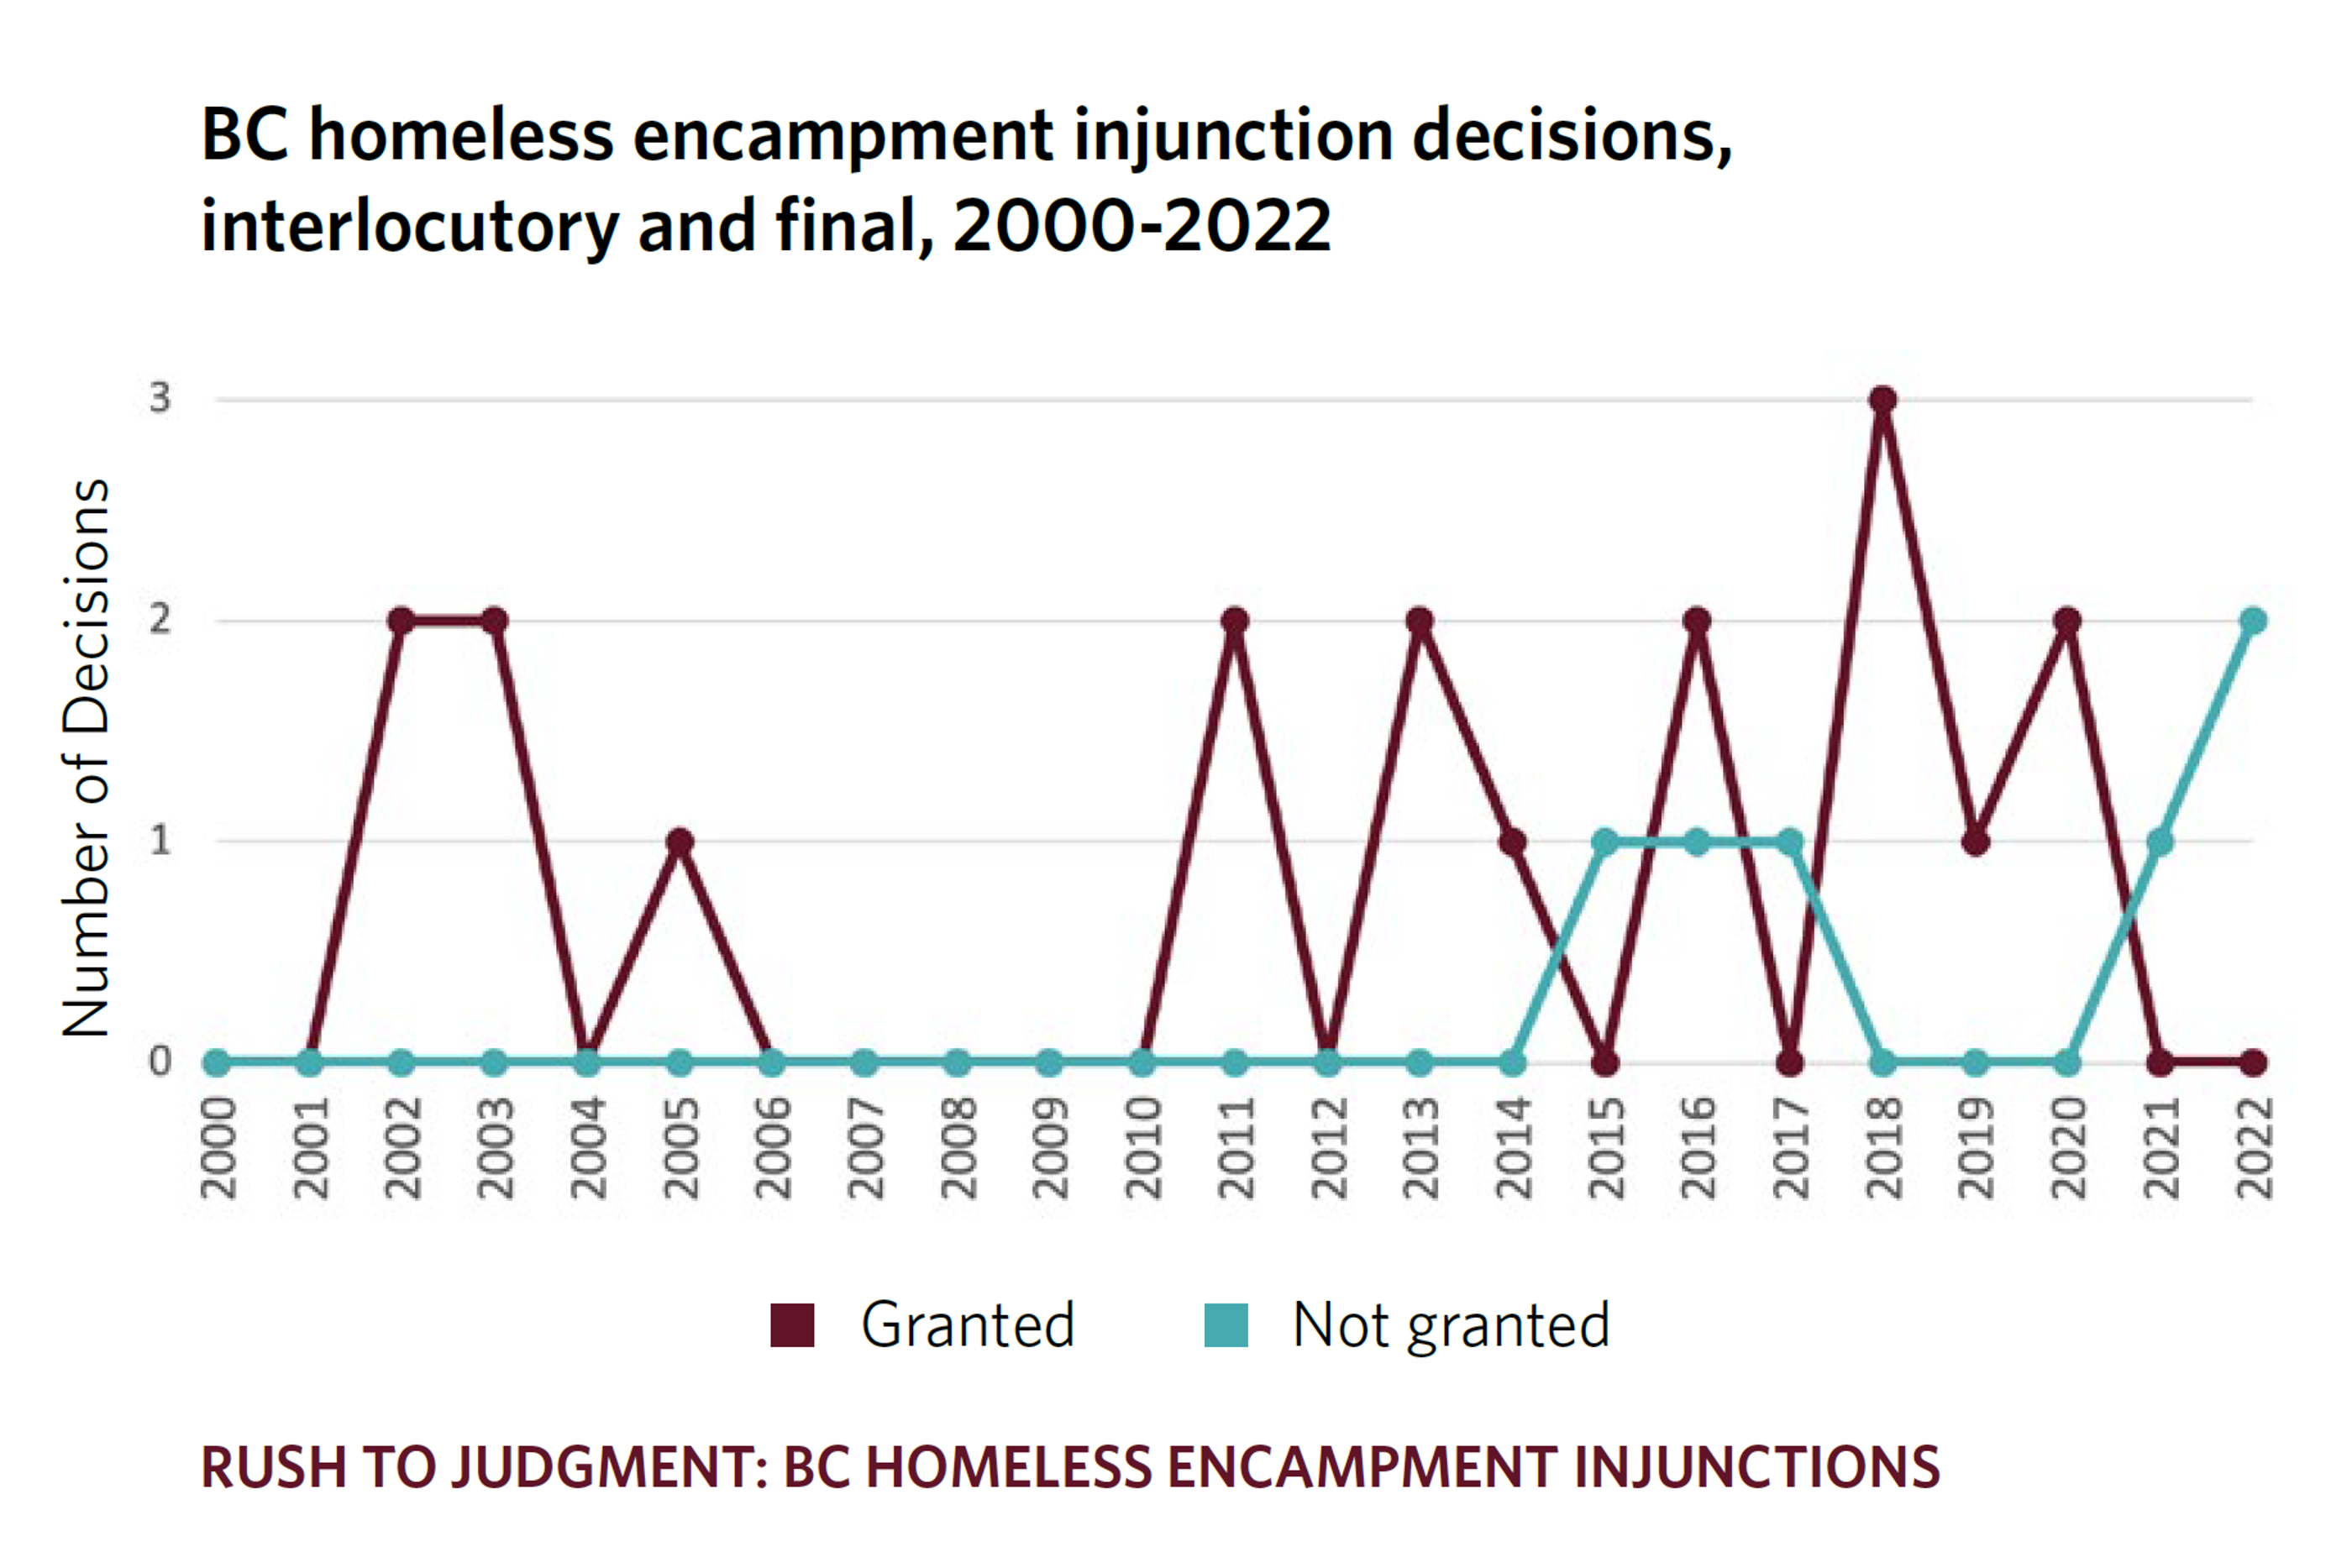 Graph showing trends in BC homeless encampment injunction decisions, 2000-2022